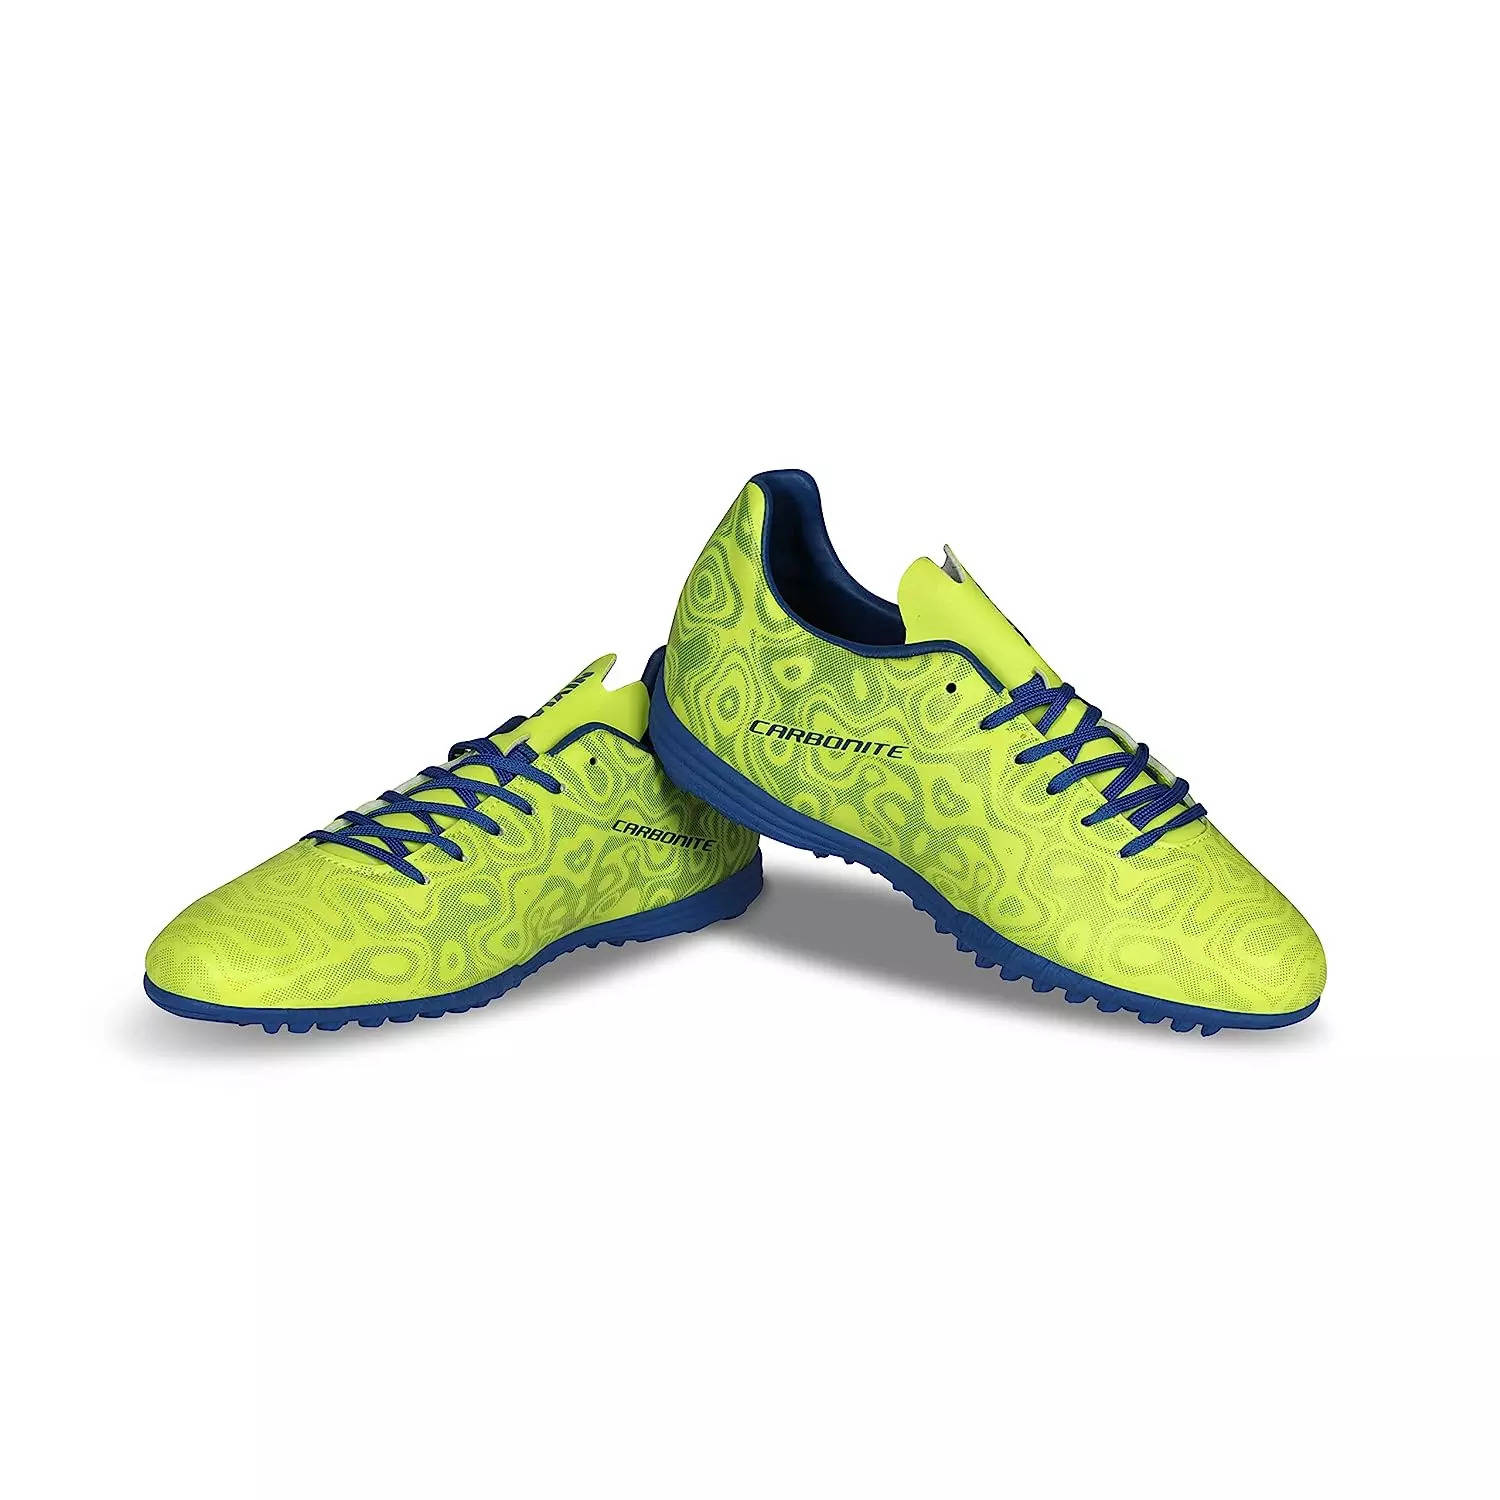 Buy Latest Football Shoes For Men Online In India | Tata CLiQ